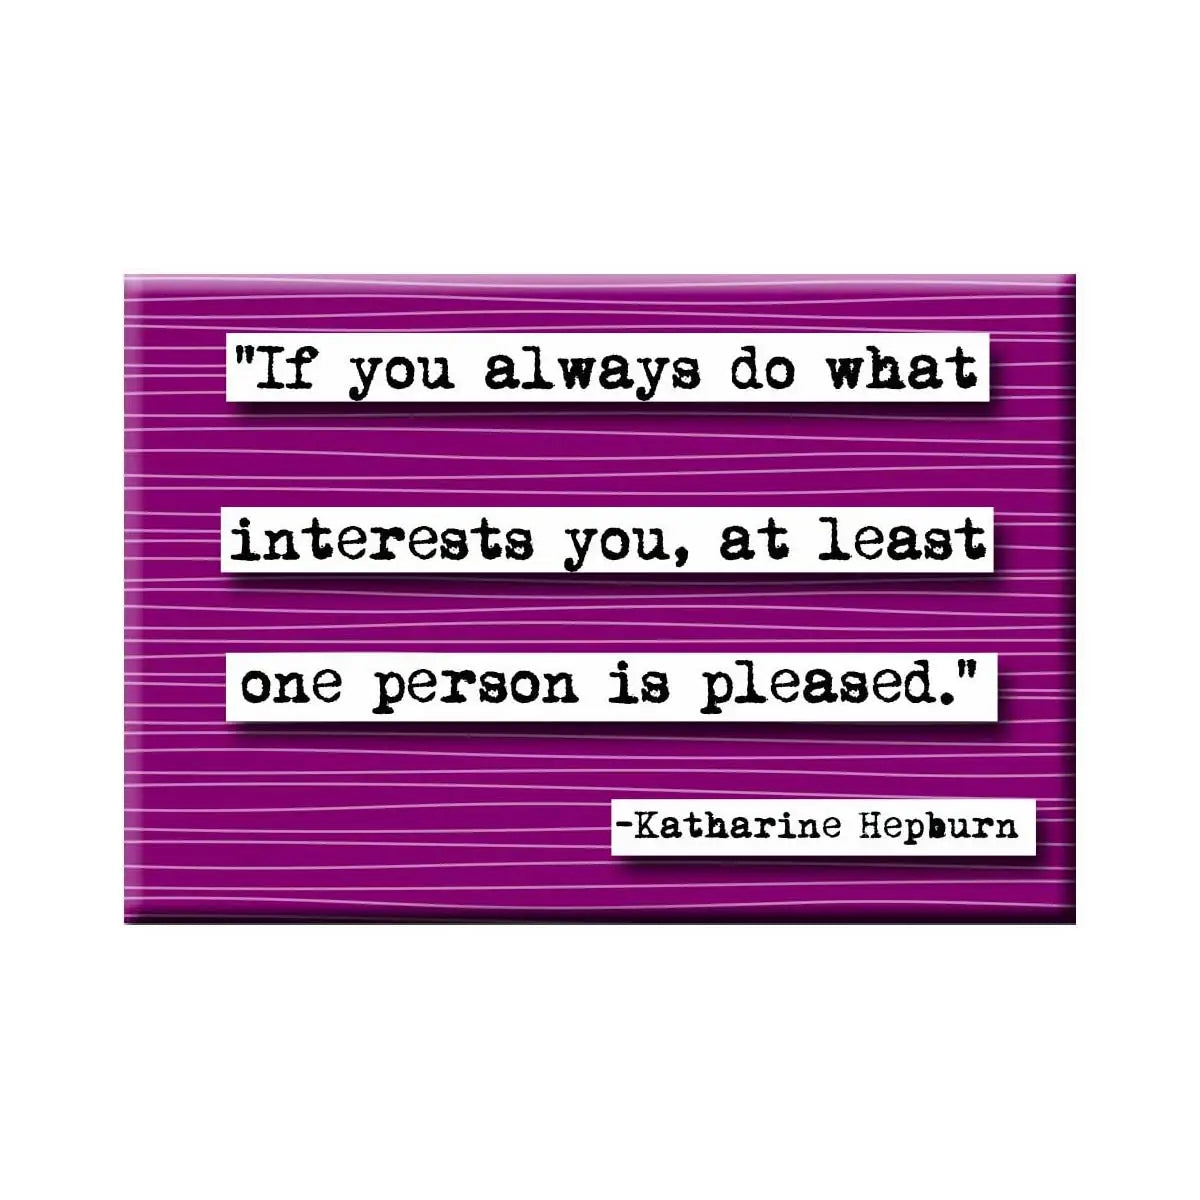 Katharine Hepburn "If You Always Do What Interests You" Magnet | 2" x 3"